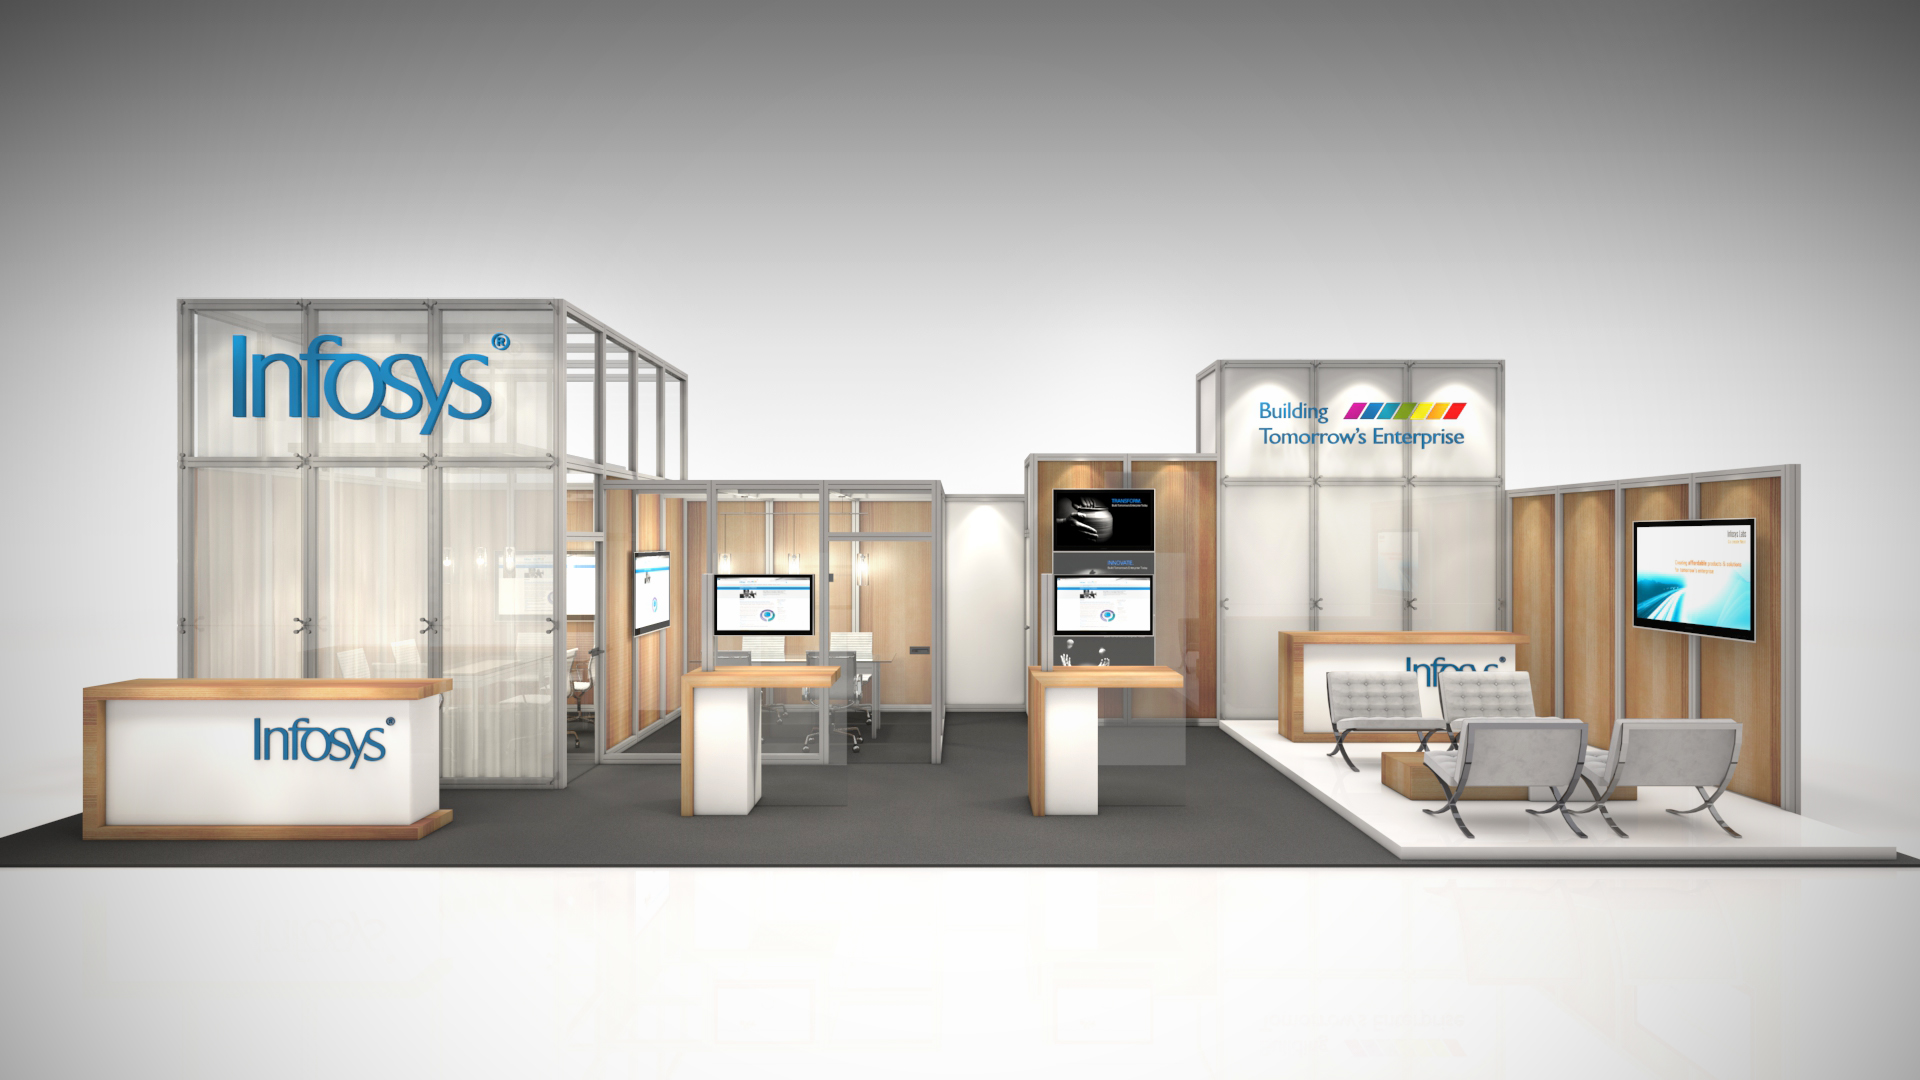 Infosys rental exhibit with a reception, meeting rooms and demo stations